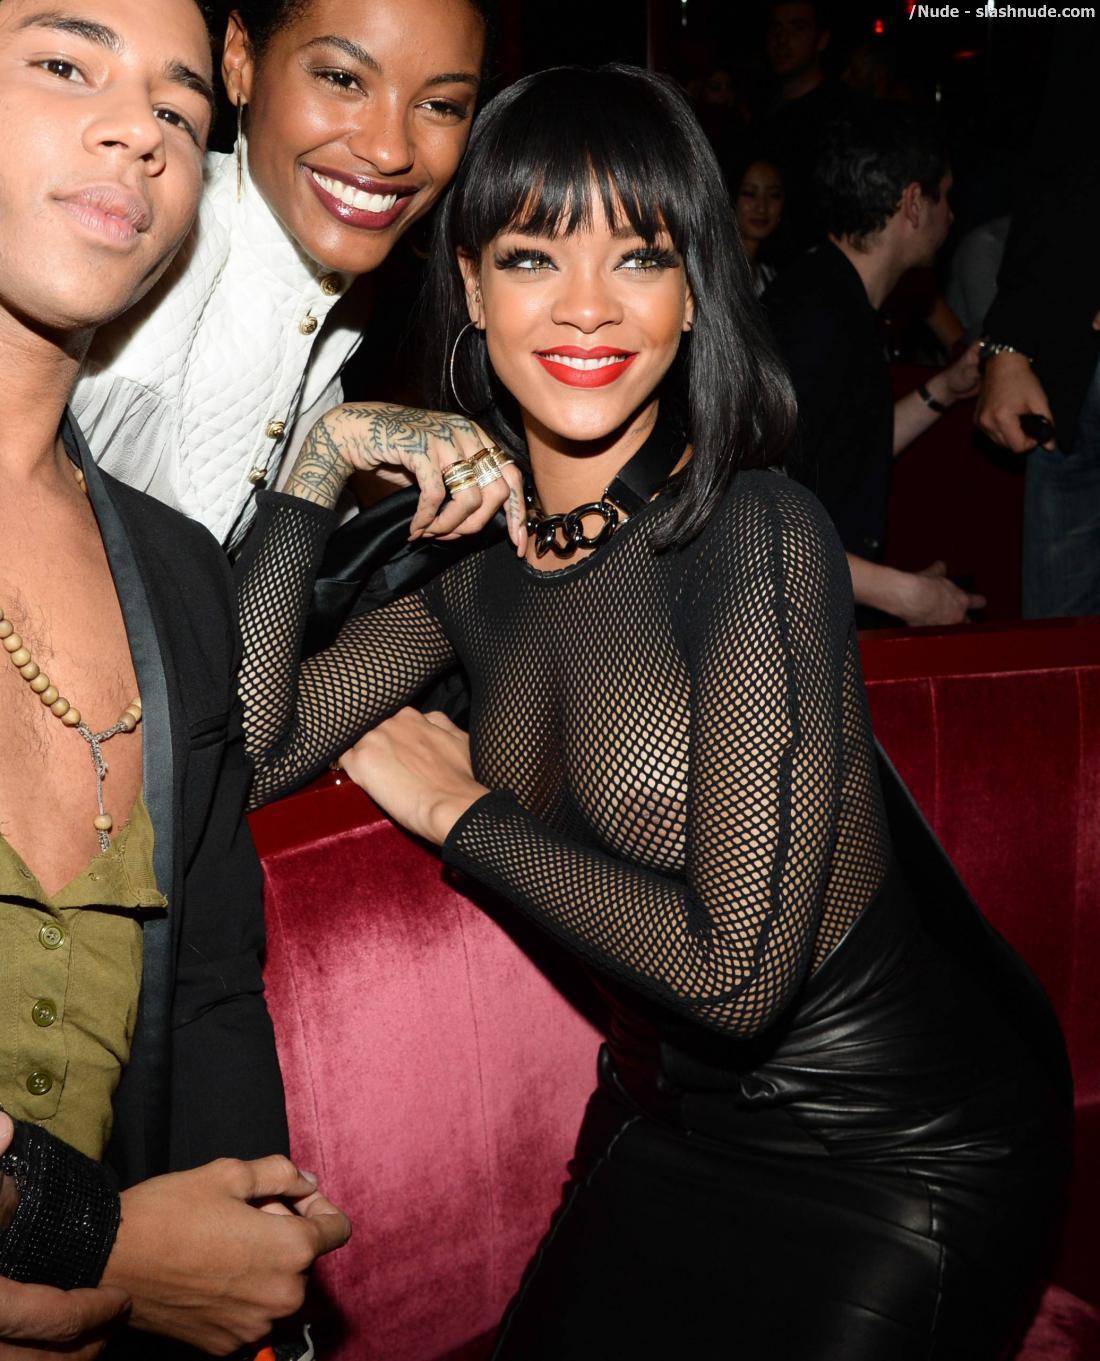 Rihanna Breasts In Totally See Through Mesh Top At Paris Party 2